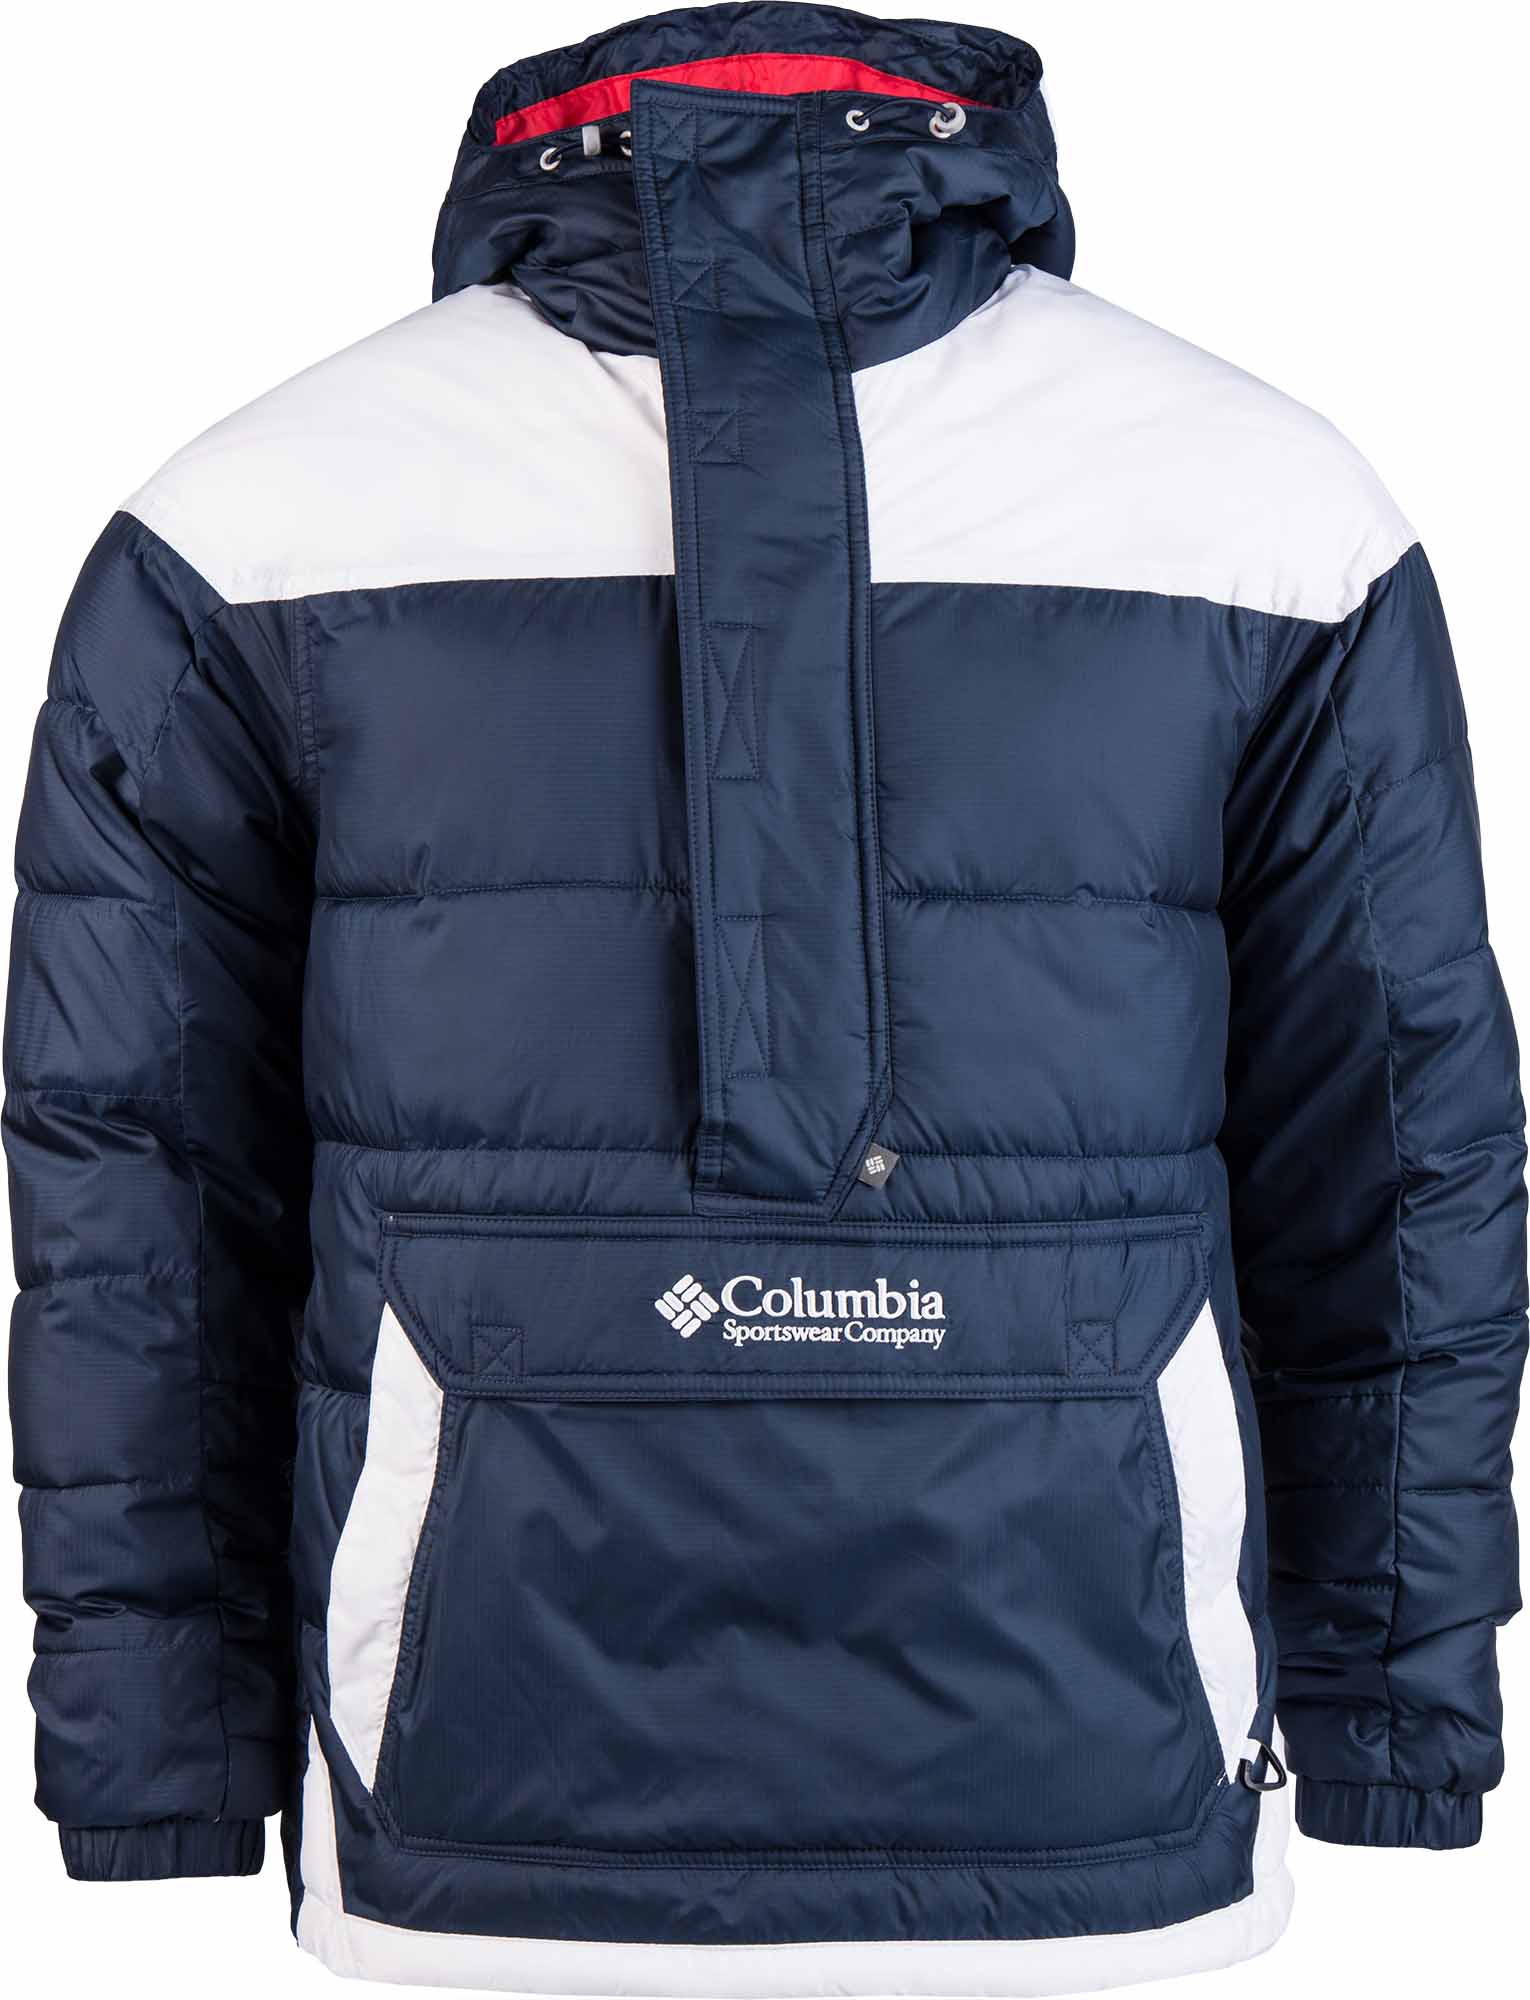 Columbia Columbia Lodge pullover jacket in black